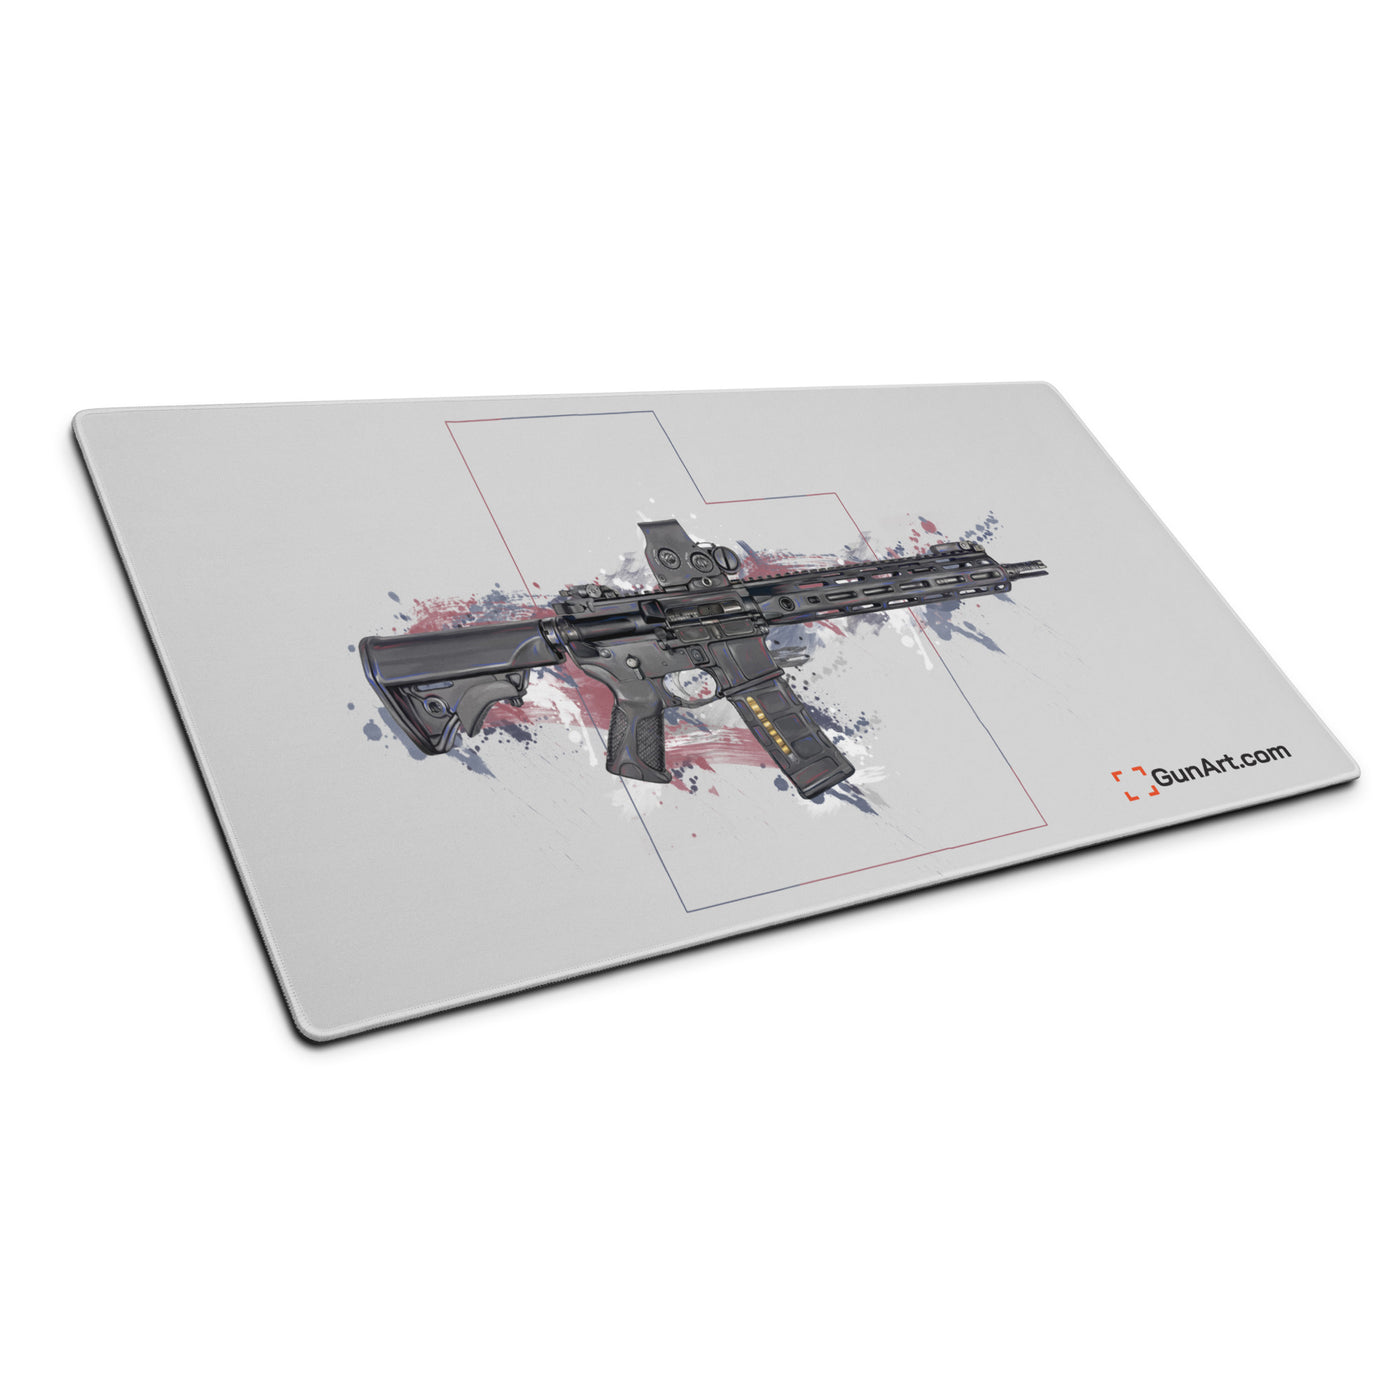 Defending Freedom - Utah - AR-15 State Gaming Mouse Pad - Colored State